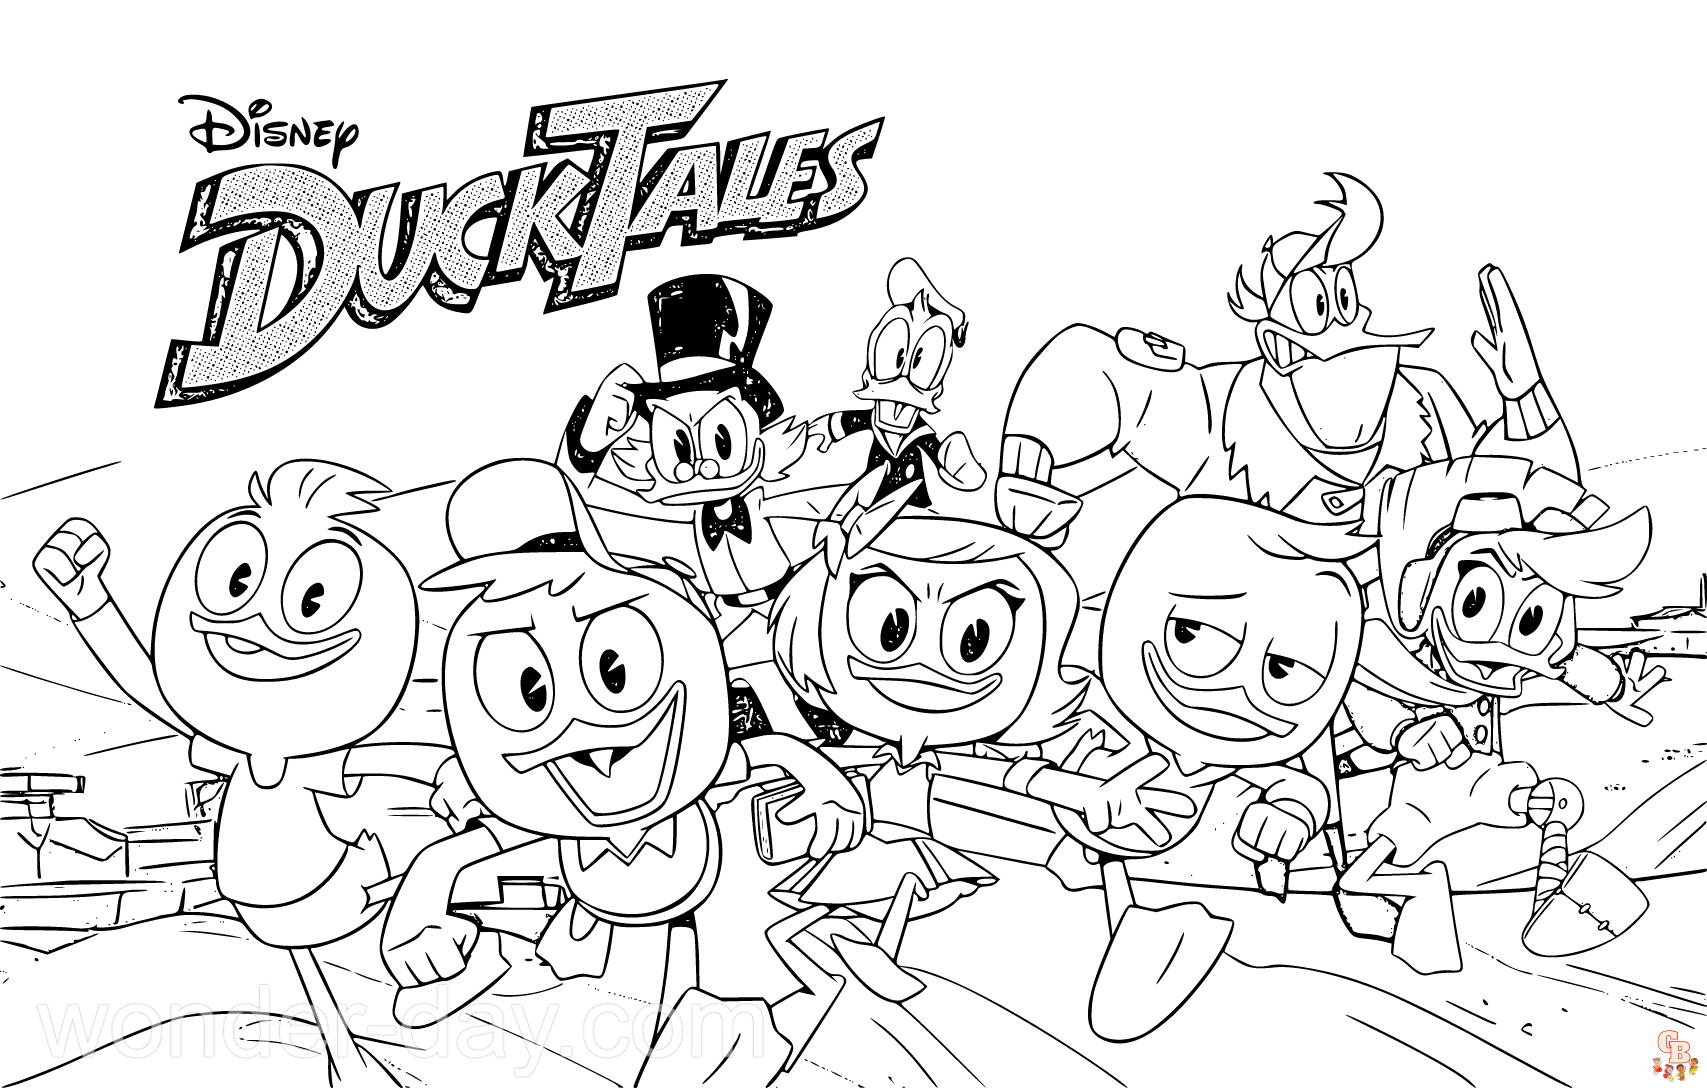 Get creative with ducktales coloring pages